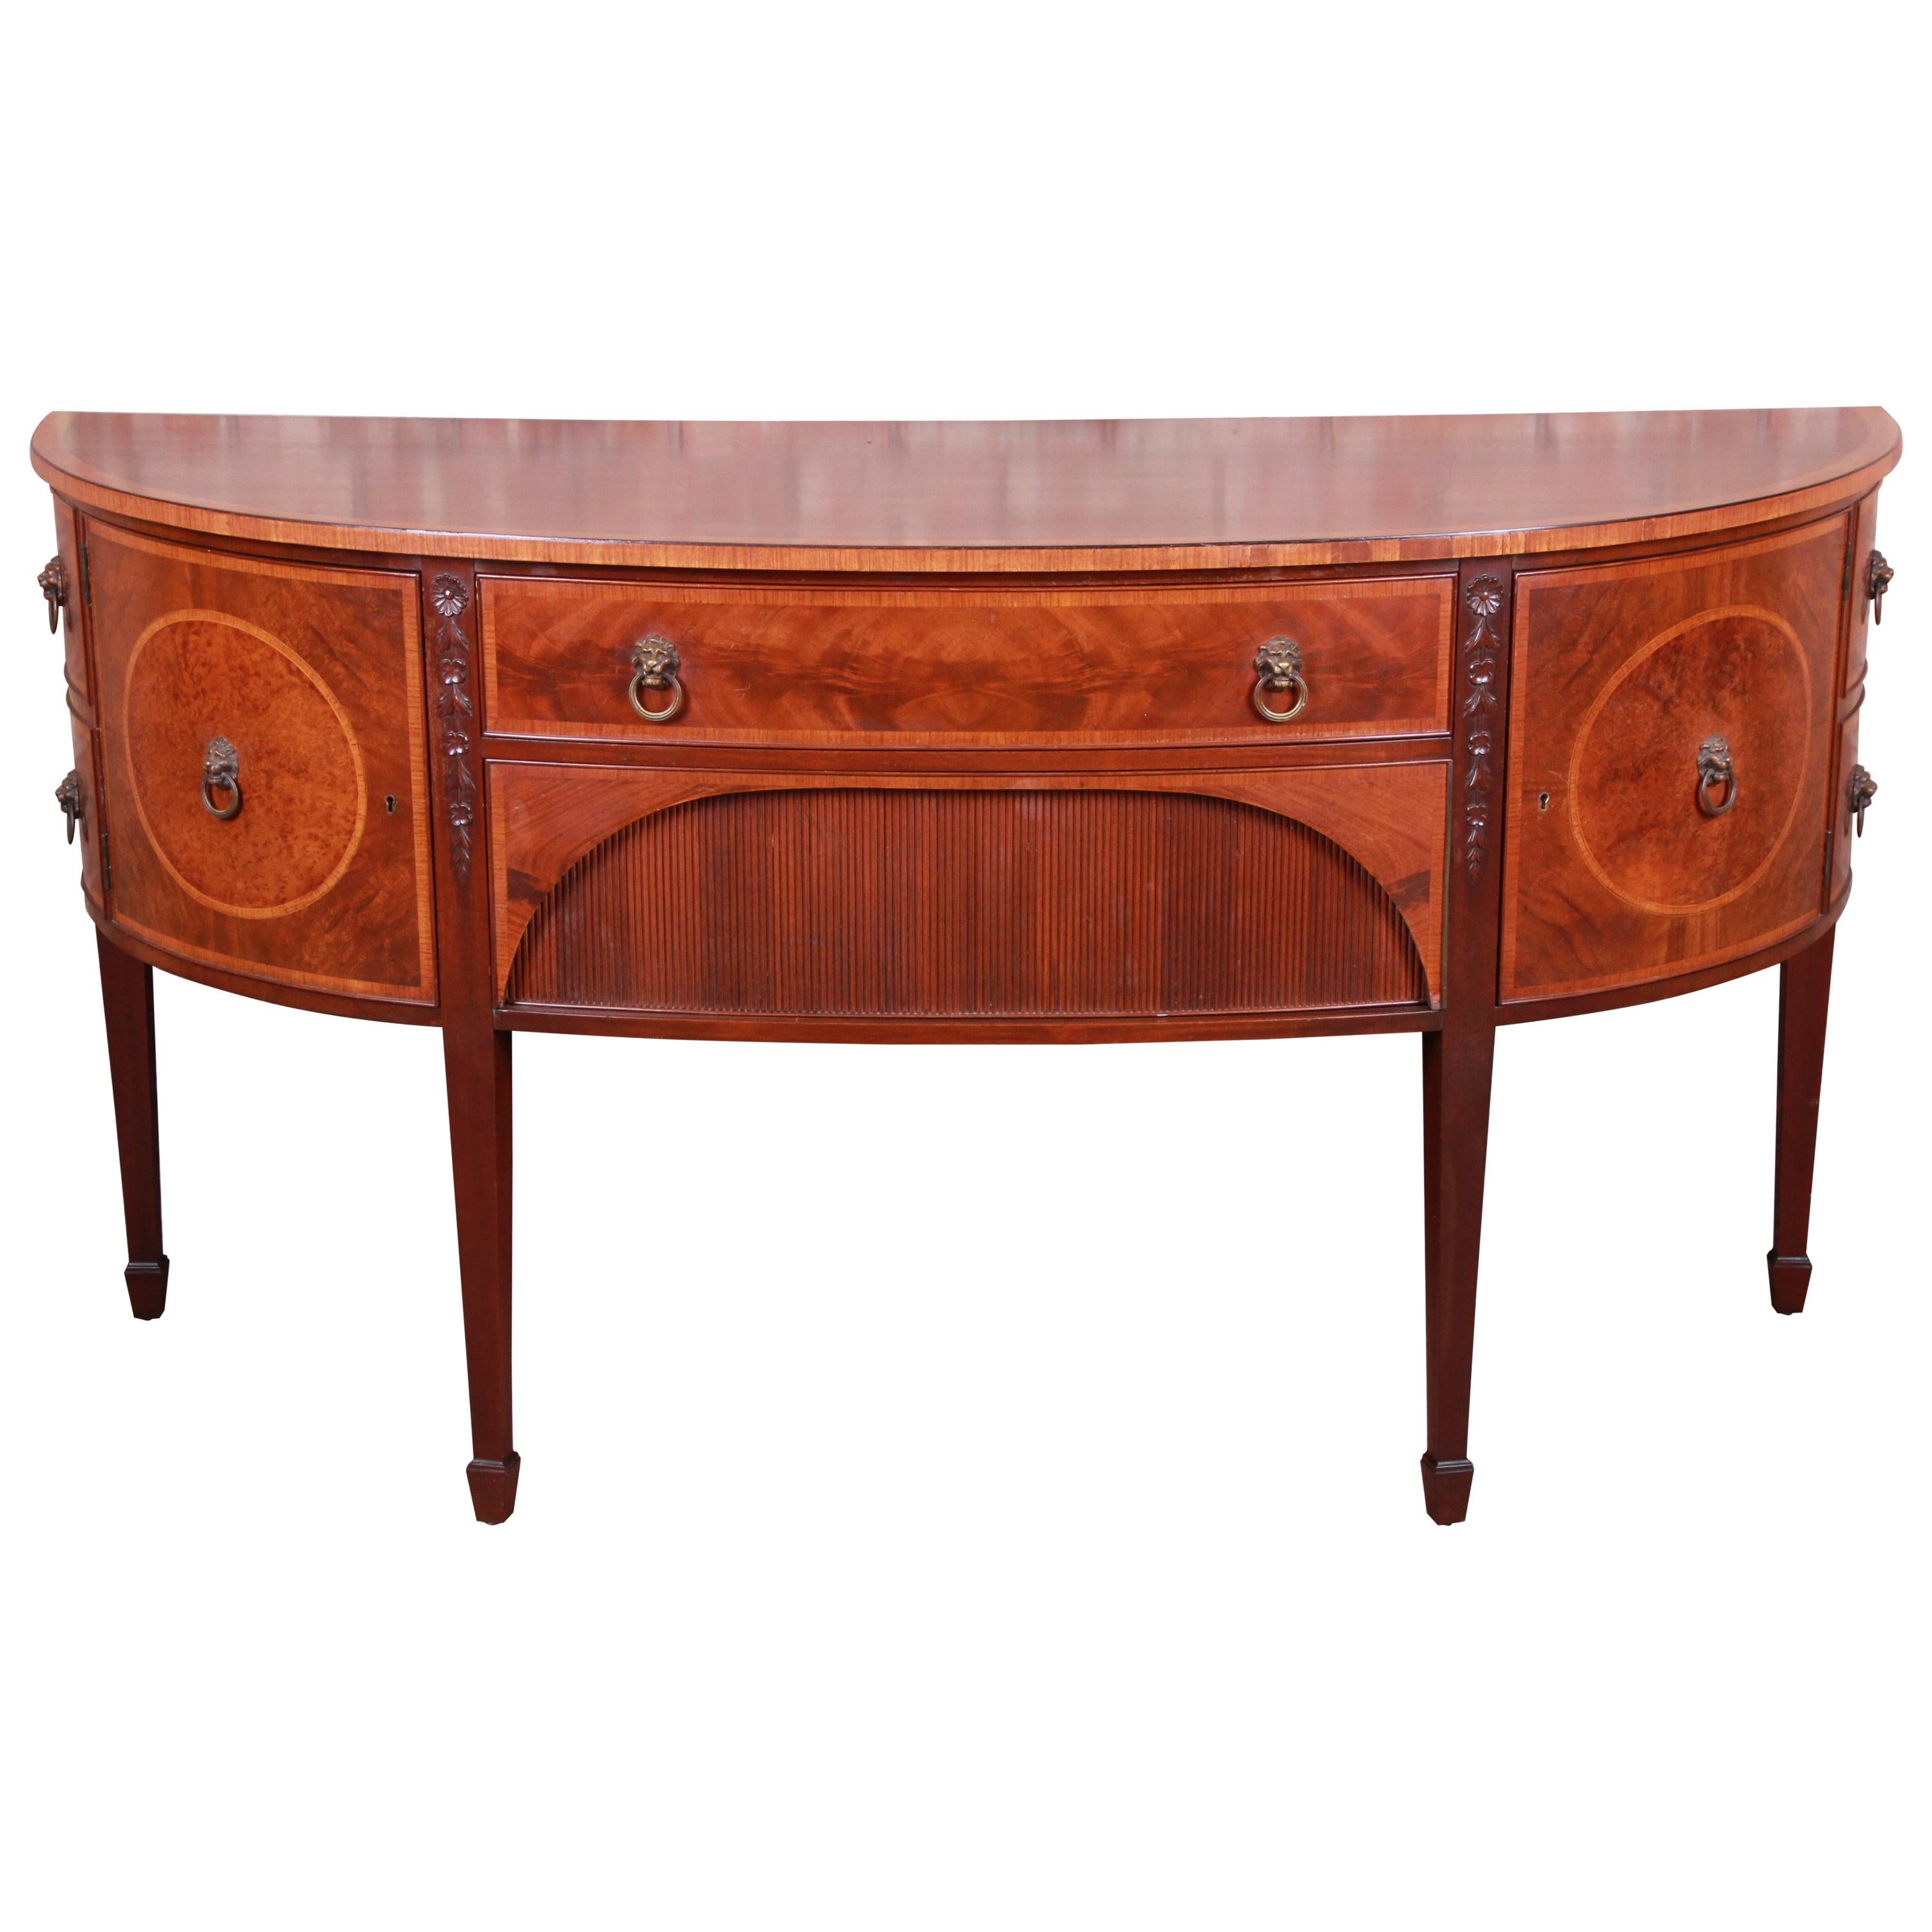 Irwin Federal Style Flame Mahogany Demilune Sideboard Credenza